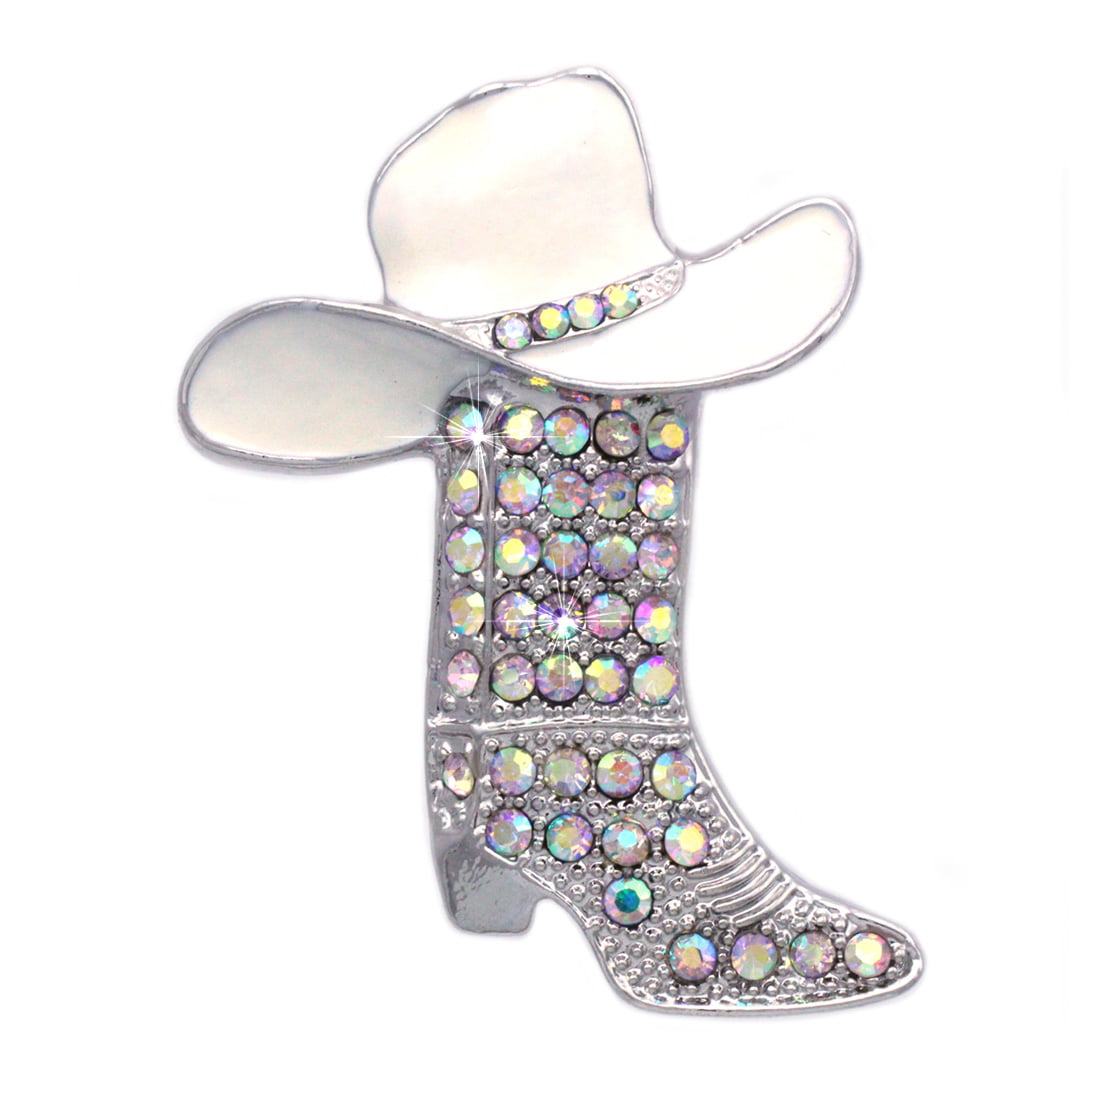 Cocojewelry Western Cowboy Cowgirl Hat Boot Brooch Pin Woman Jewelry